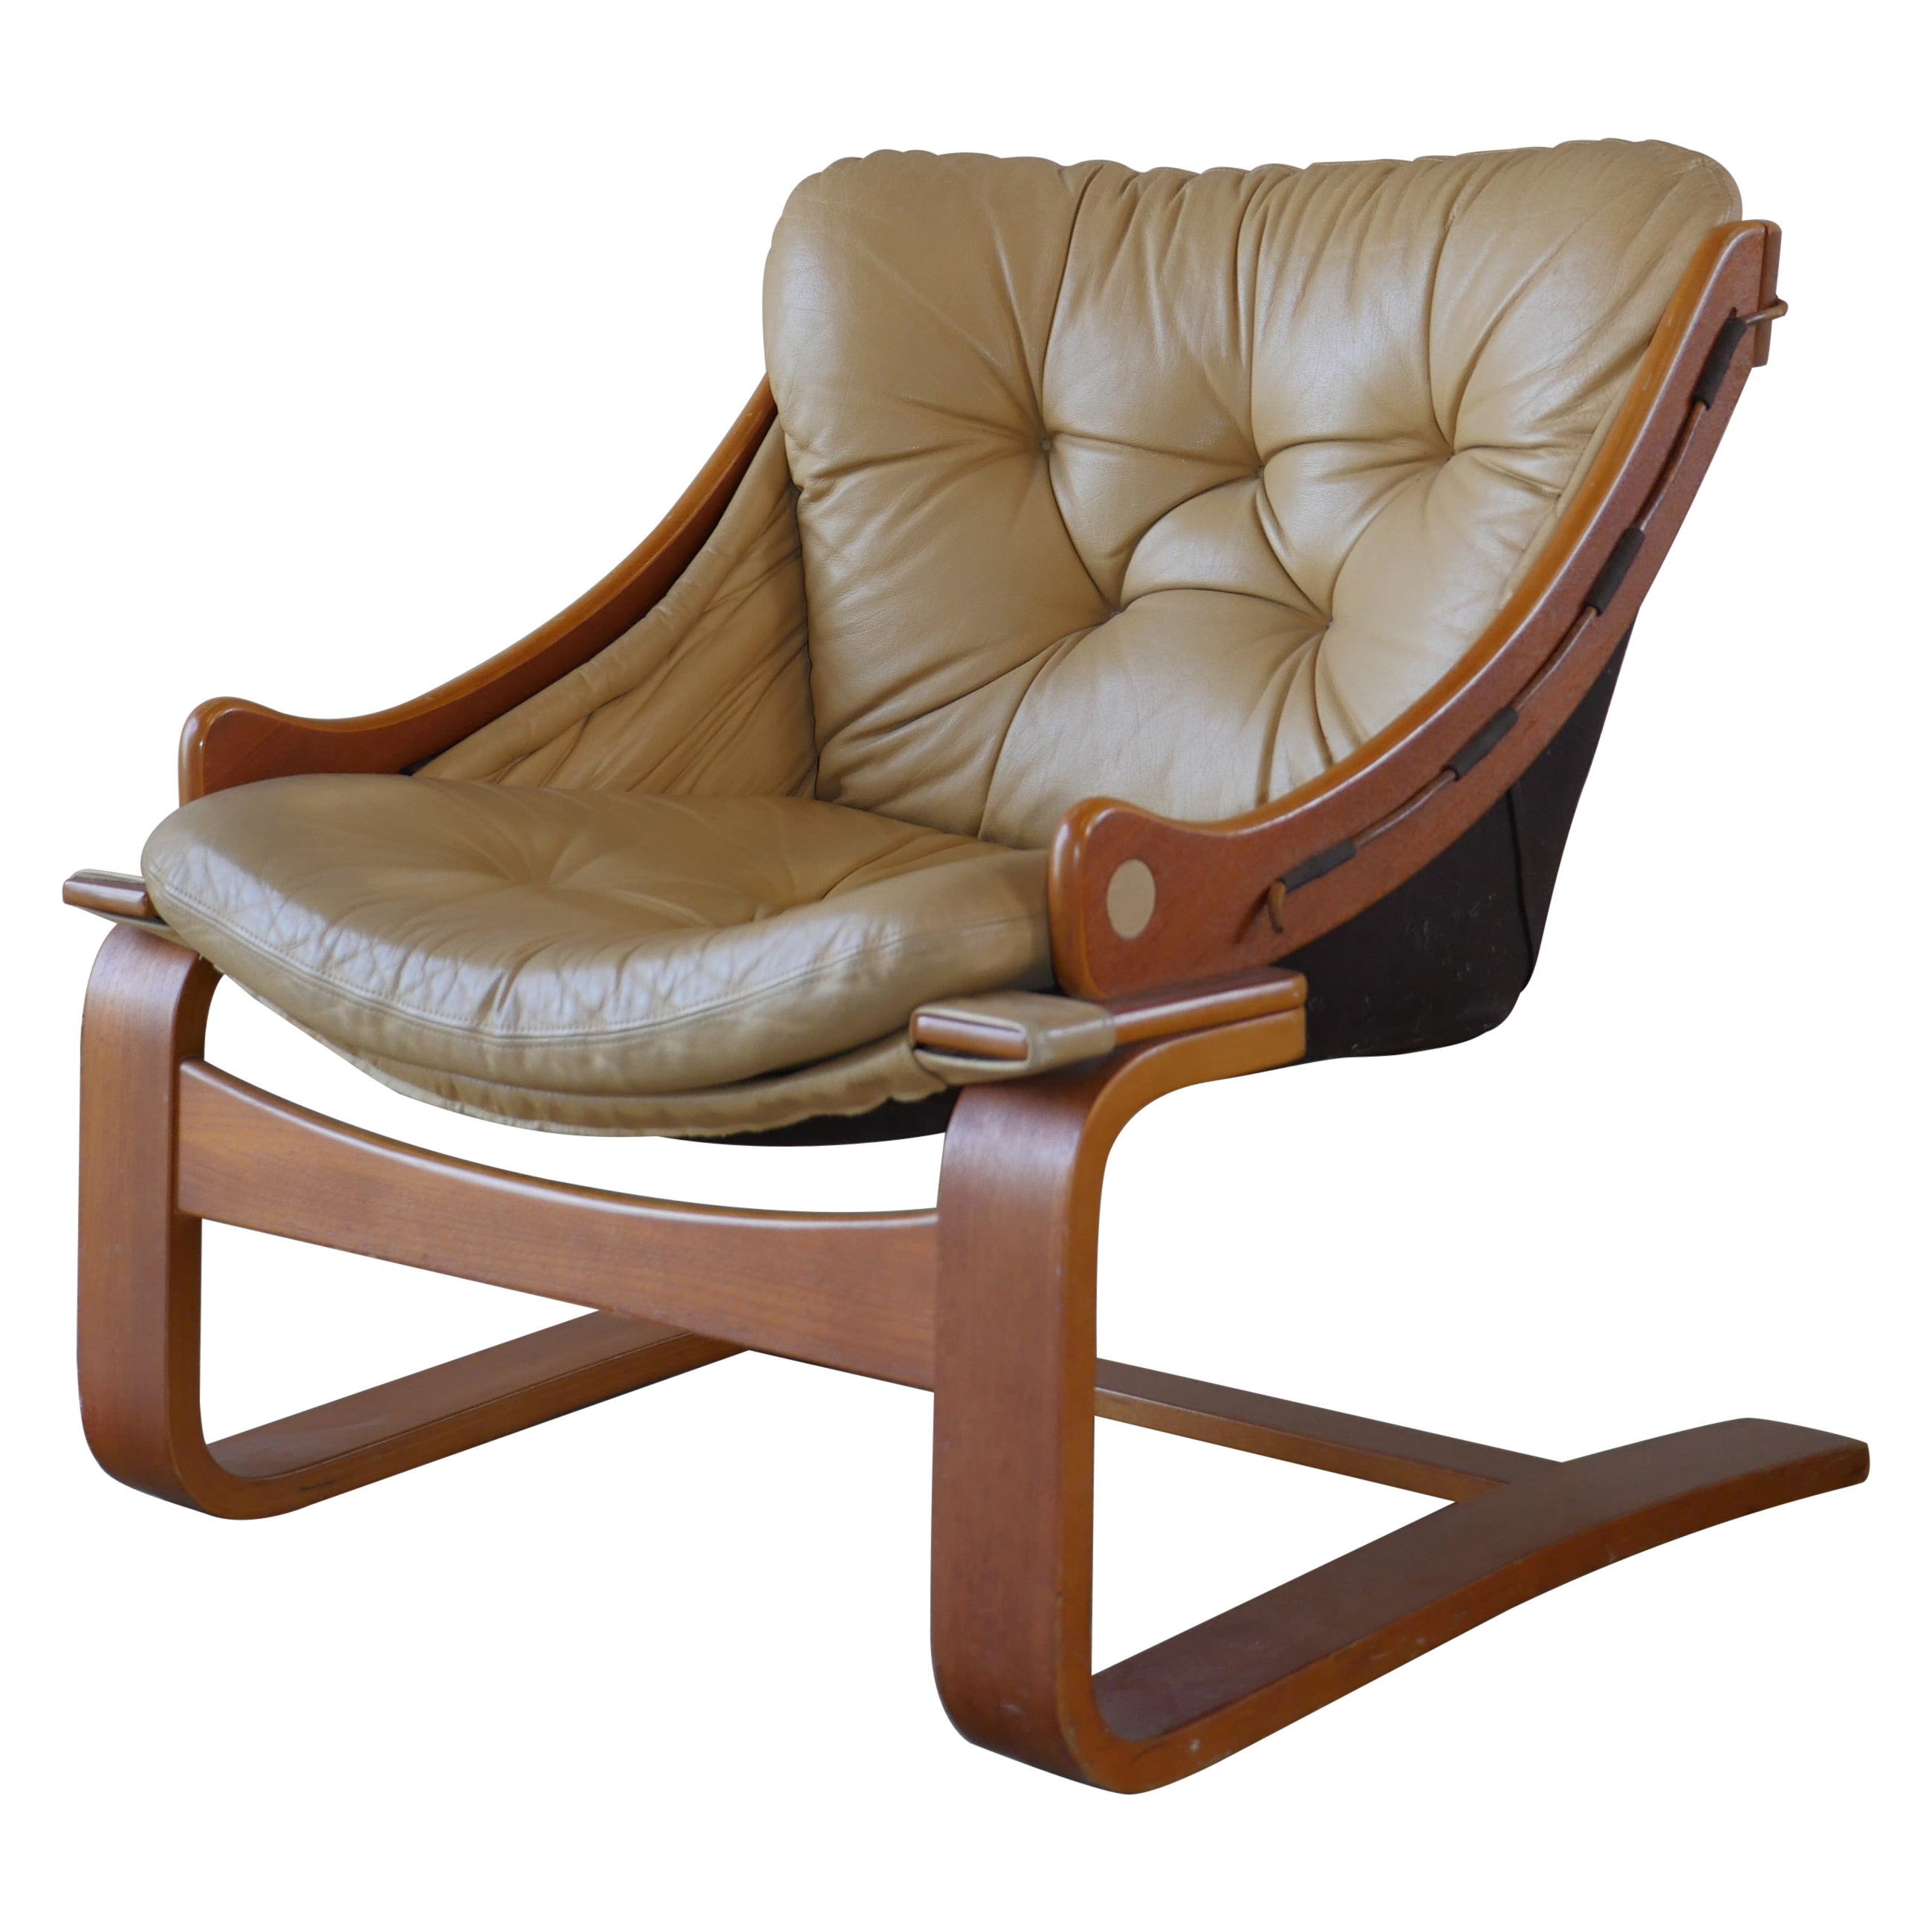 1970s, Scandinavian Bentwood Cantilevered Leather Lounge Chair